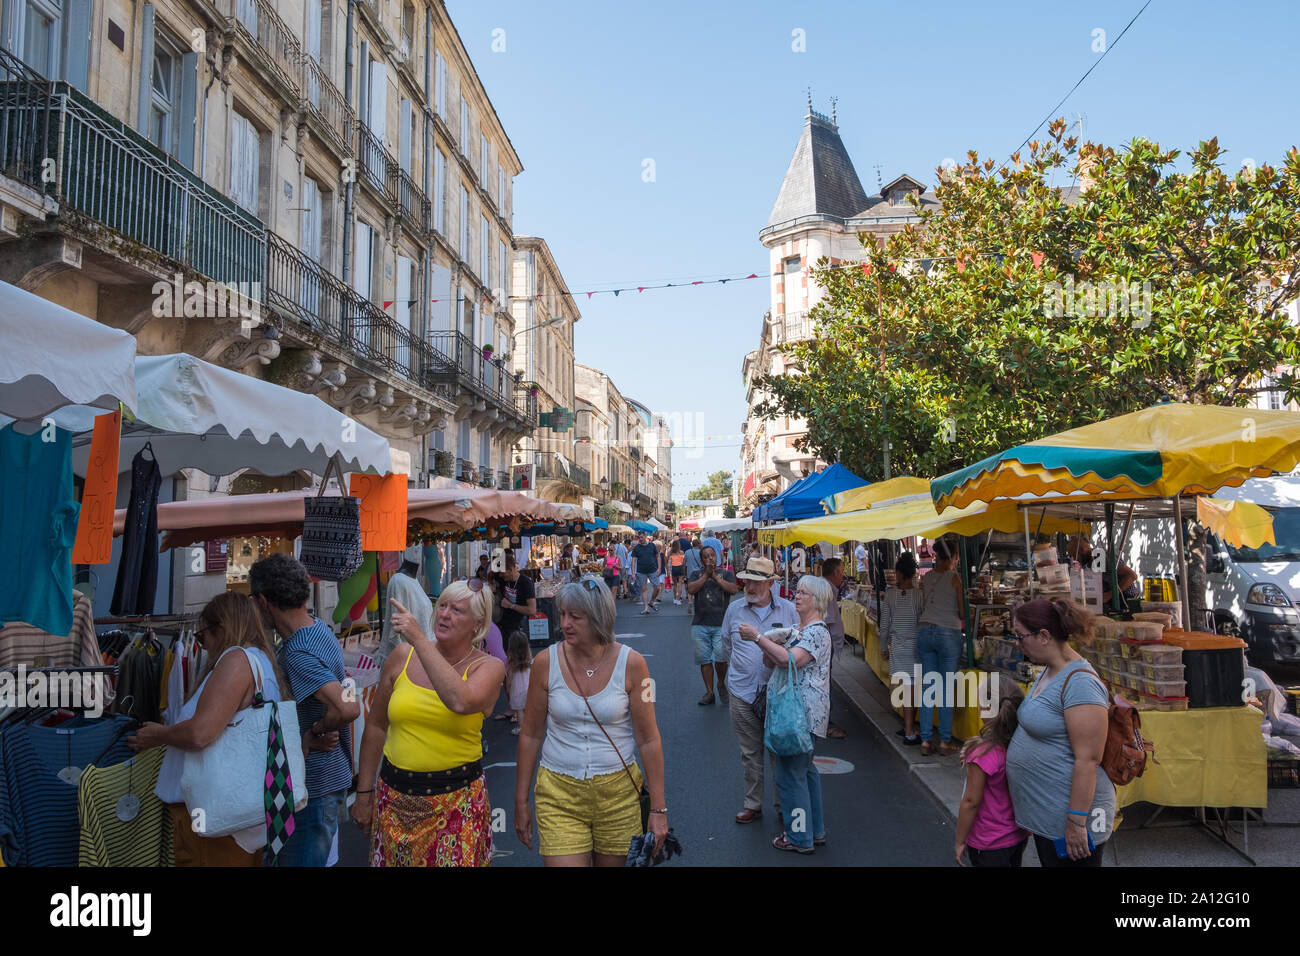 The popular saturday street market in Sainte-Foy-La-Grande in the Gironde Department of South Western France Stock Photo